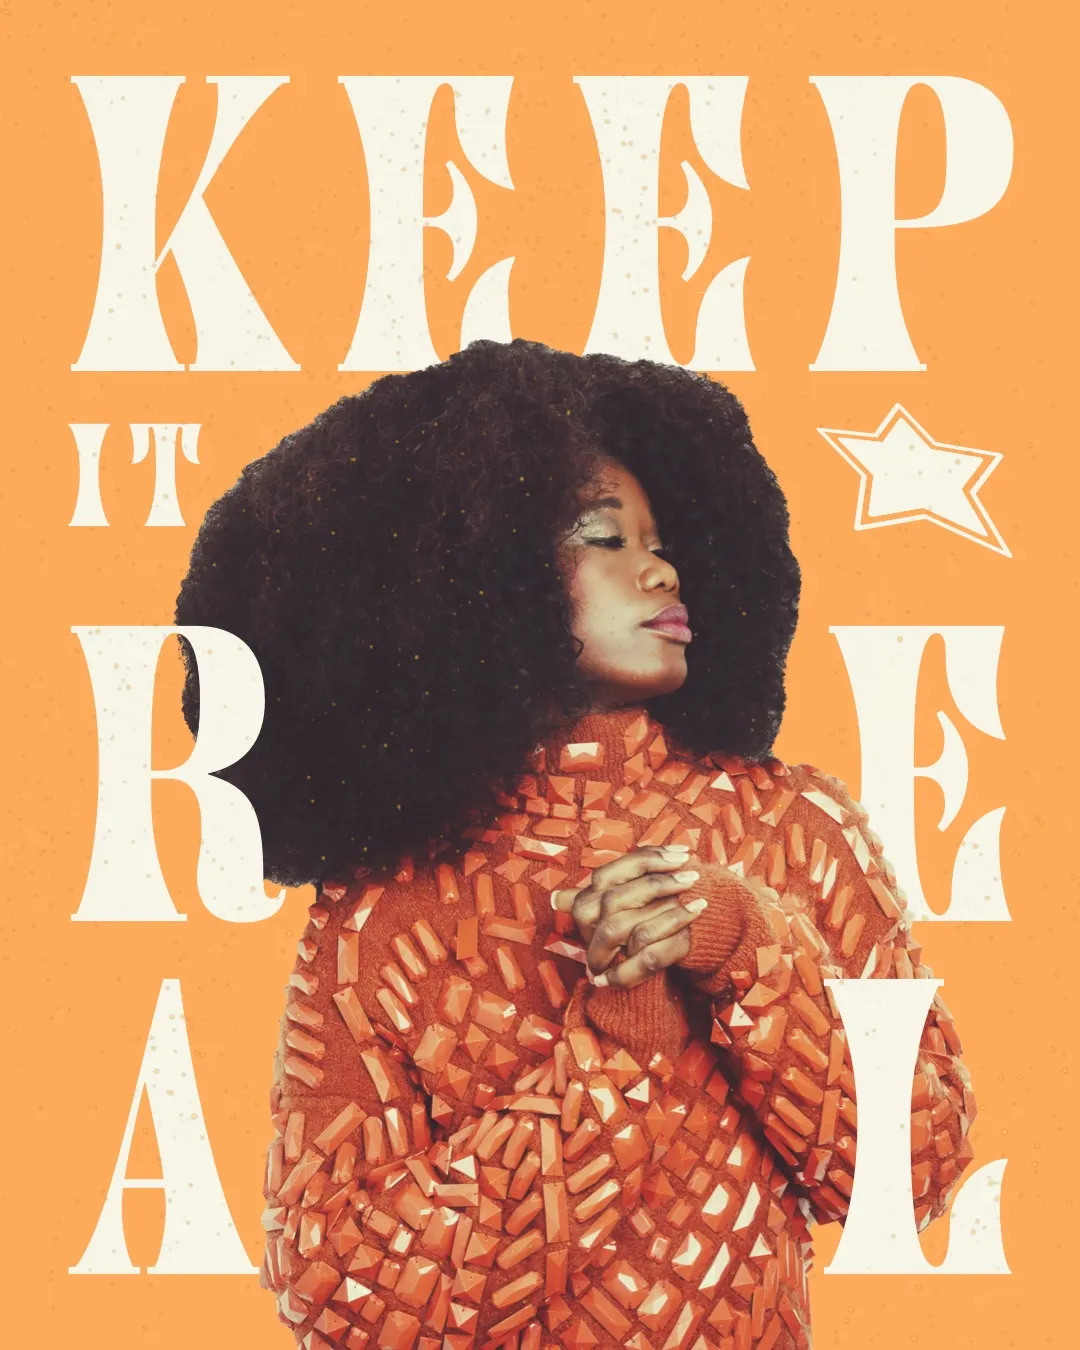 Orange Groovy Retro Style Woman with Afro Photo and Typography Slang Phrase Instagram Portrait